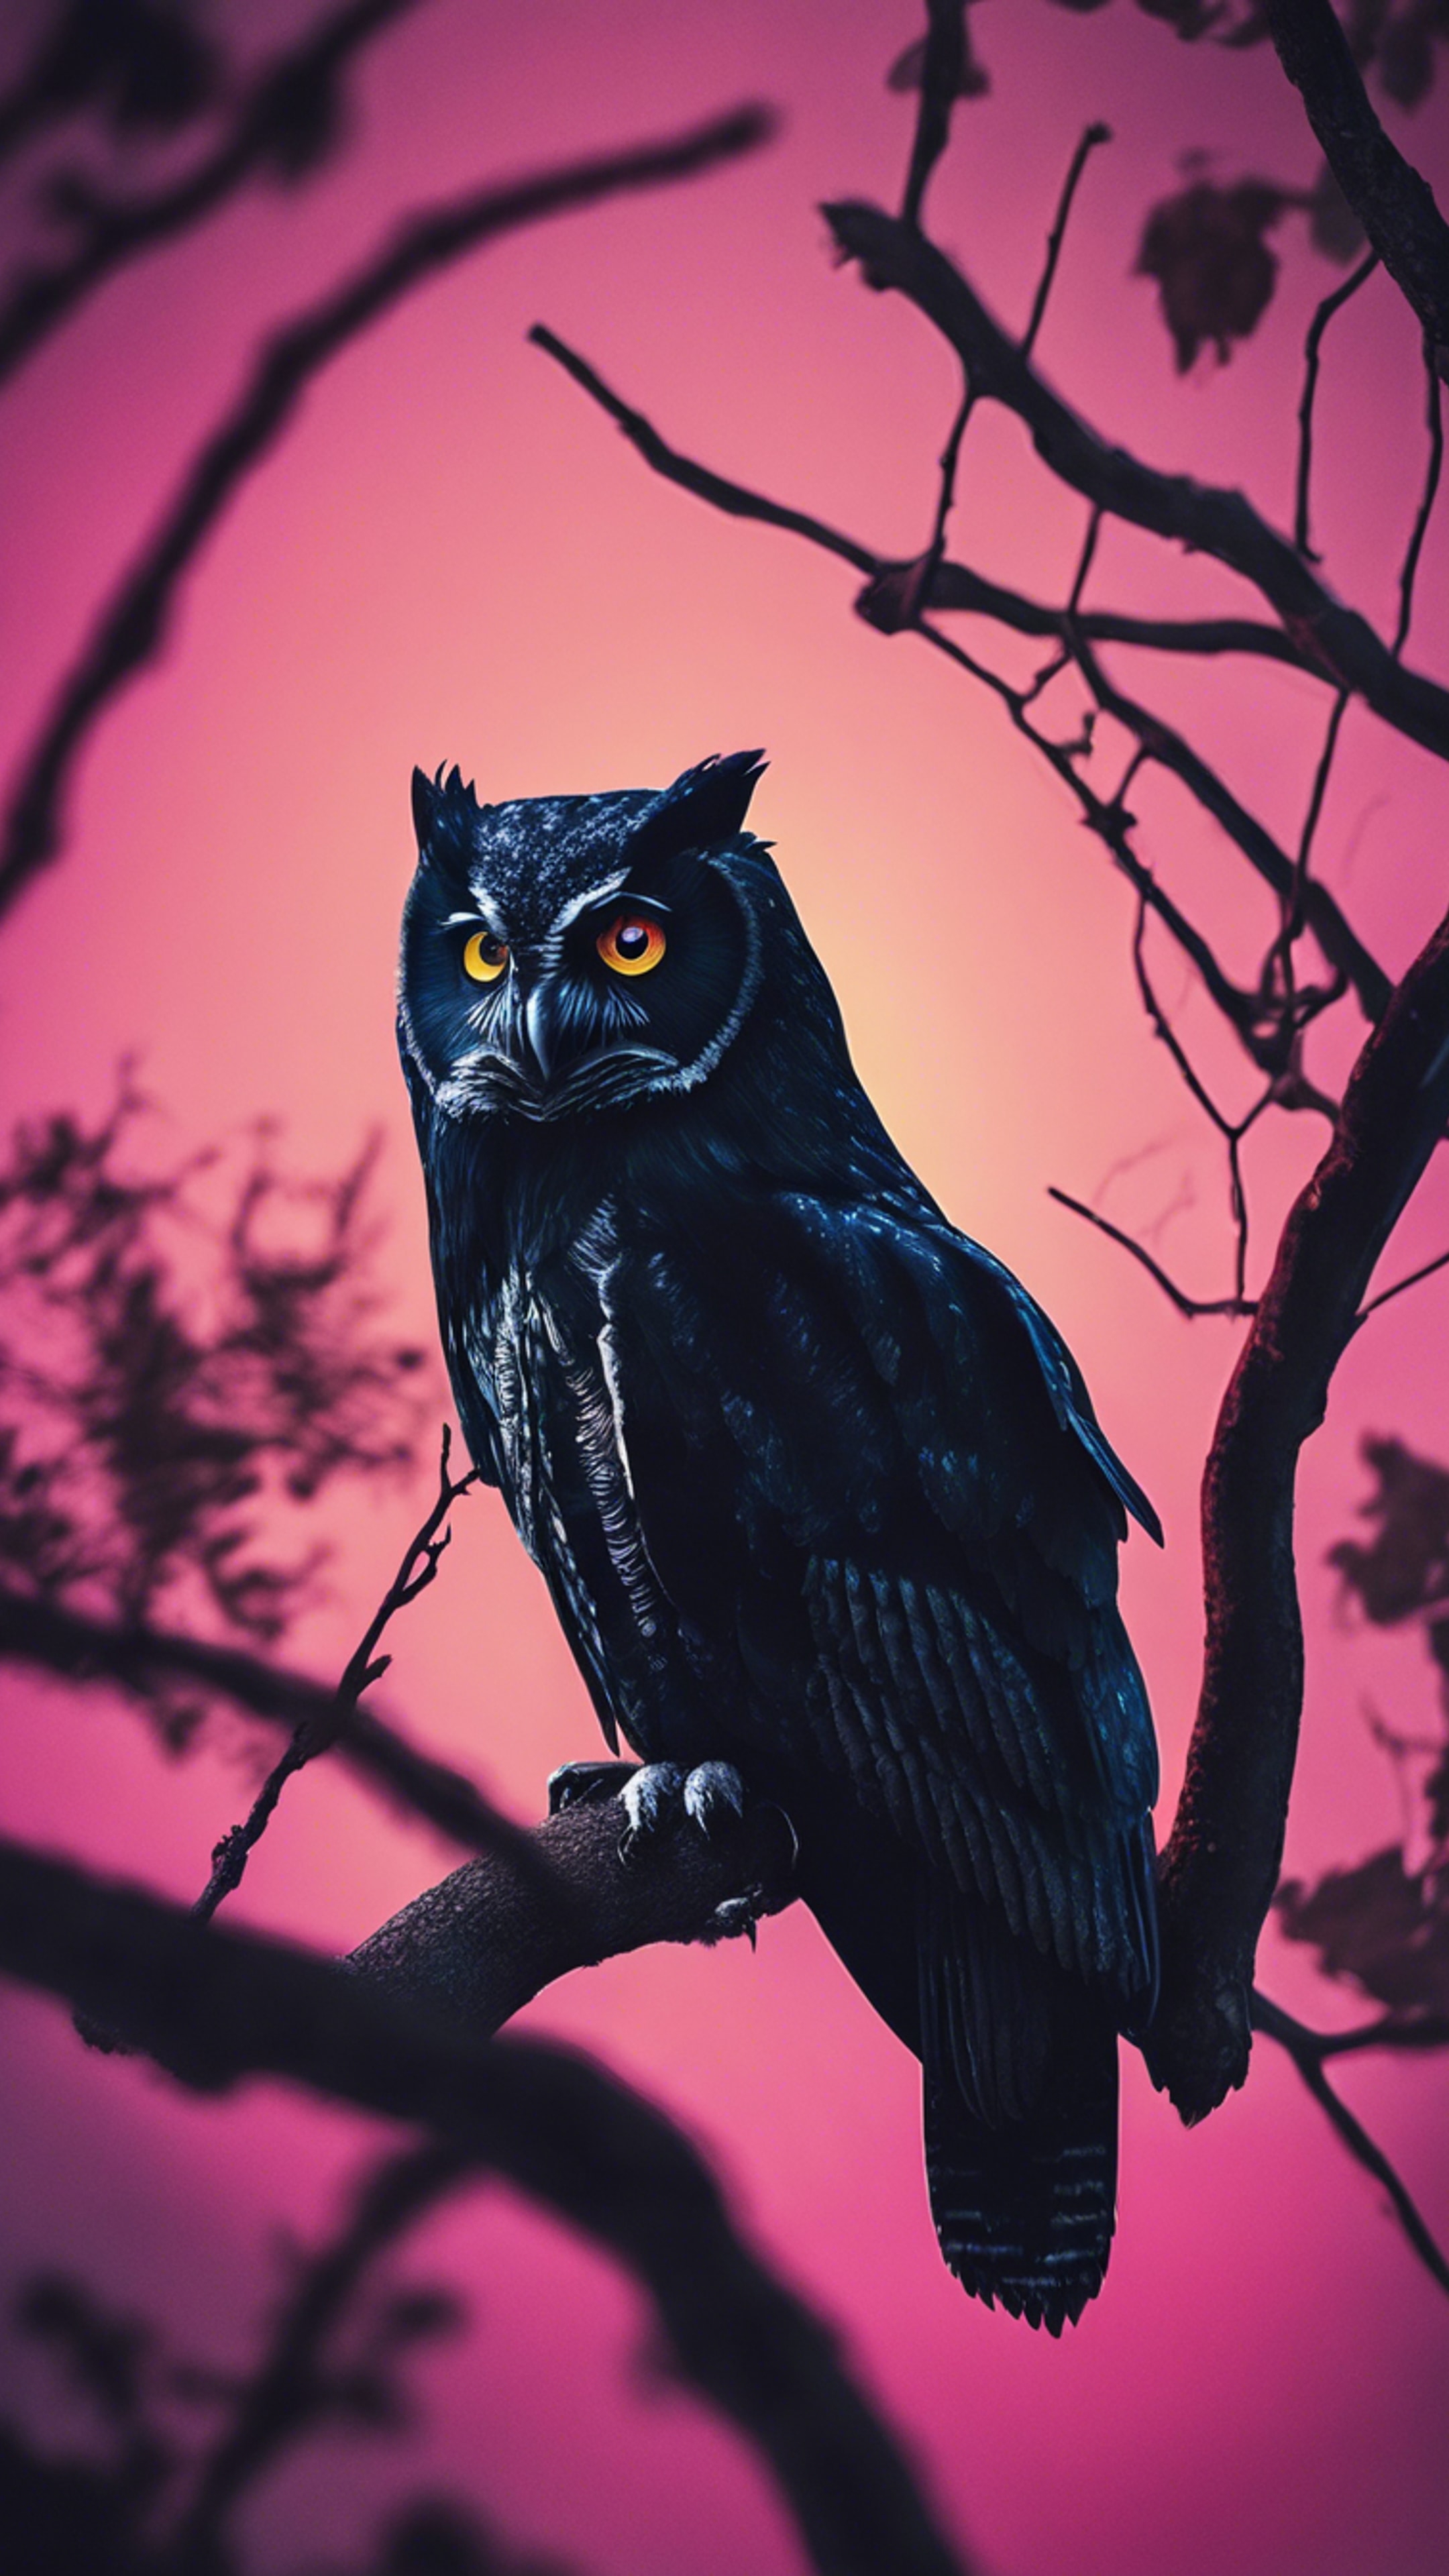 A pitch black owl, its eyes glowing in cool neon colors, perched on a tree branch on a moonless night. کاغذ دیواری[de9c9fccdafb4c81814c]